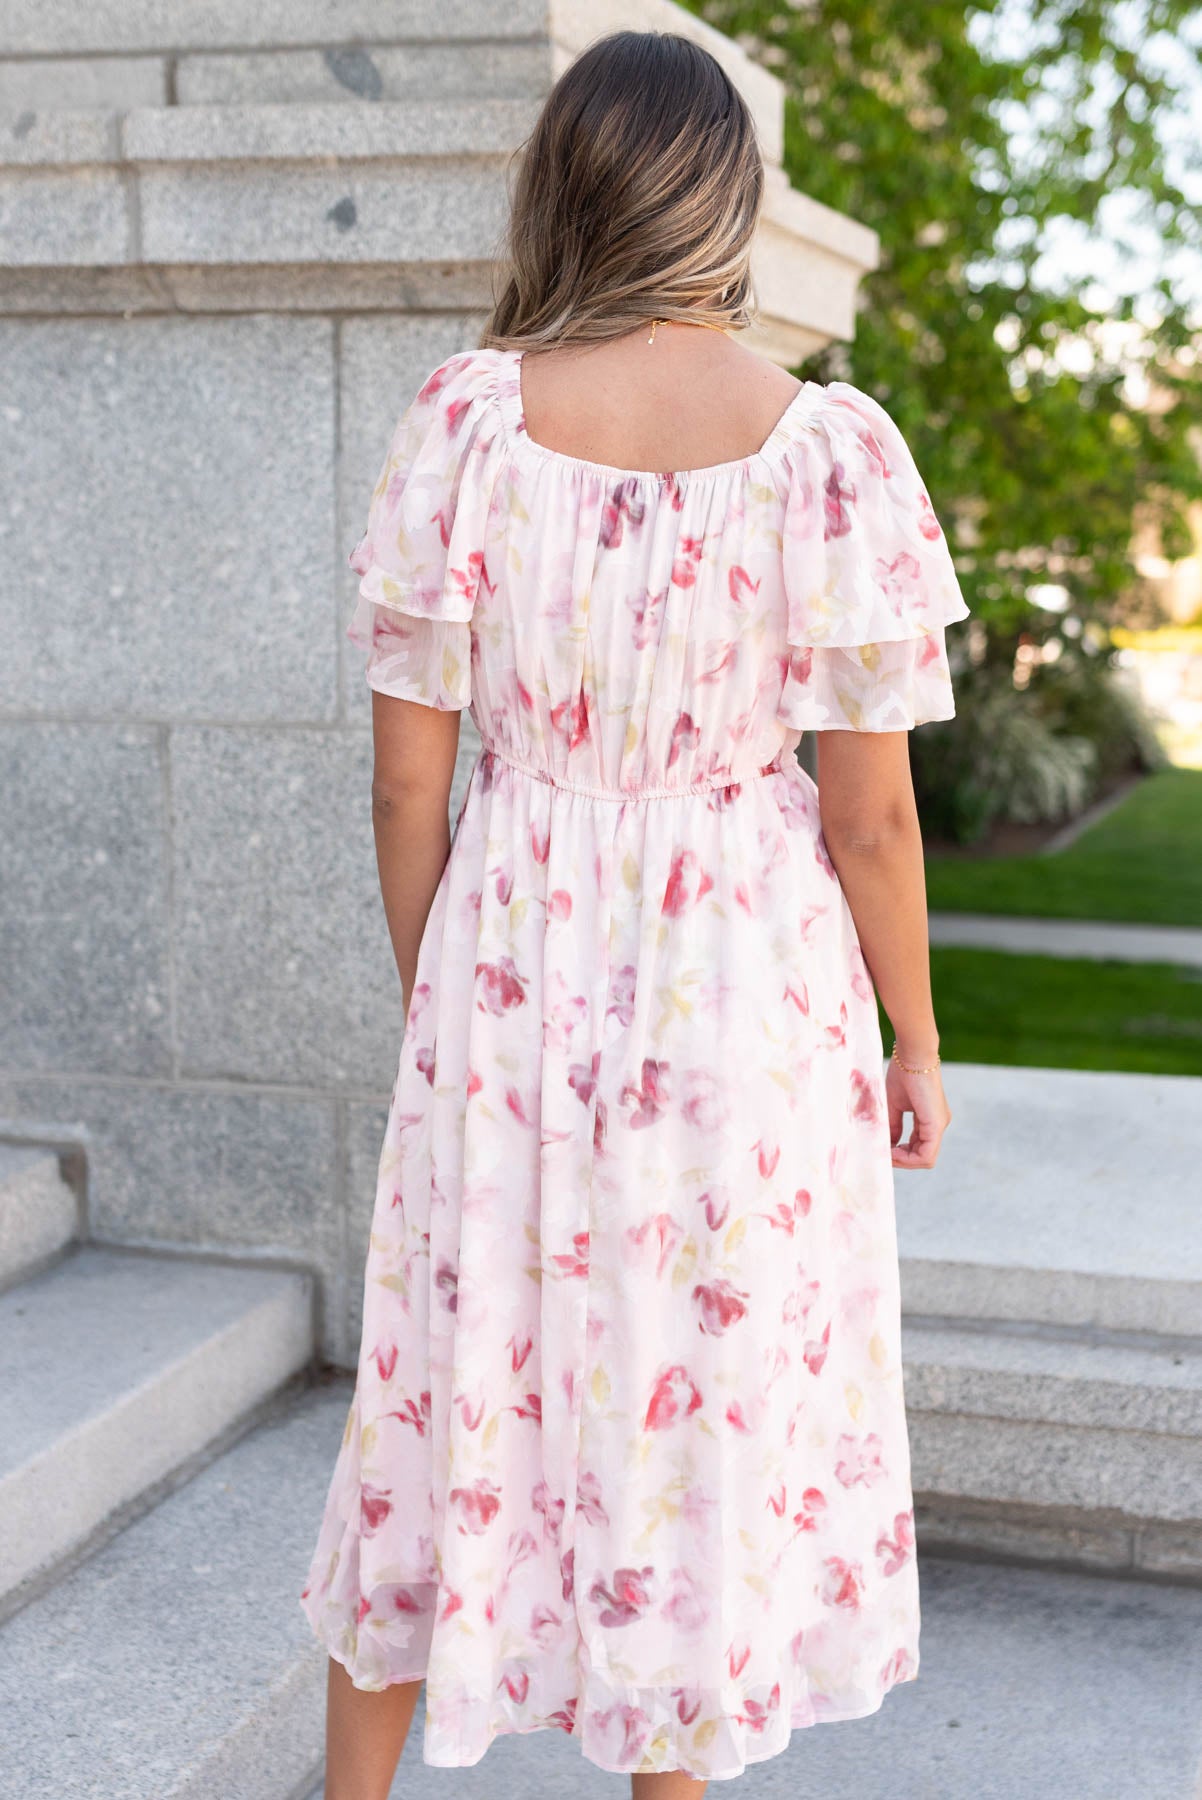 Back view of the blush watercolor floral dress